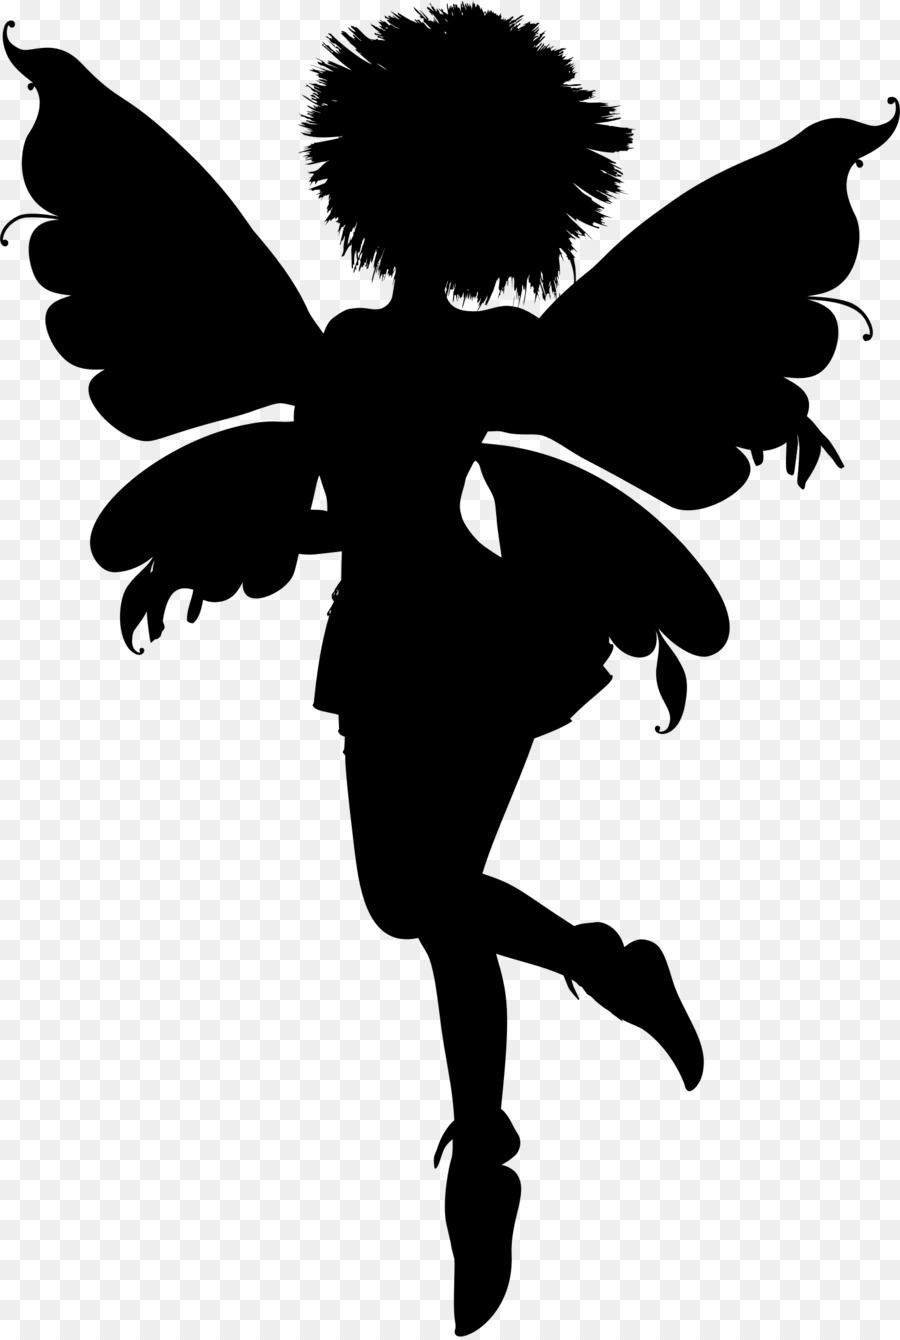 Fairy Silhouette AutoCAD DXF - tooth fairy png download - 1484*2204 - Free Transparent Fairy png Download.